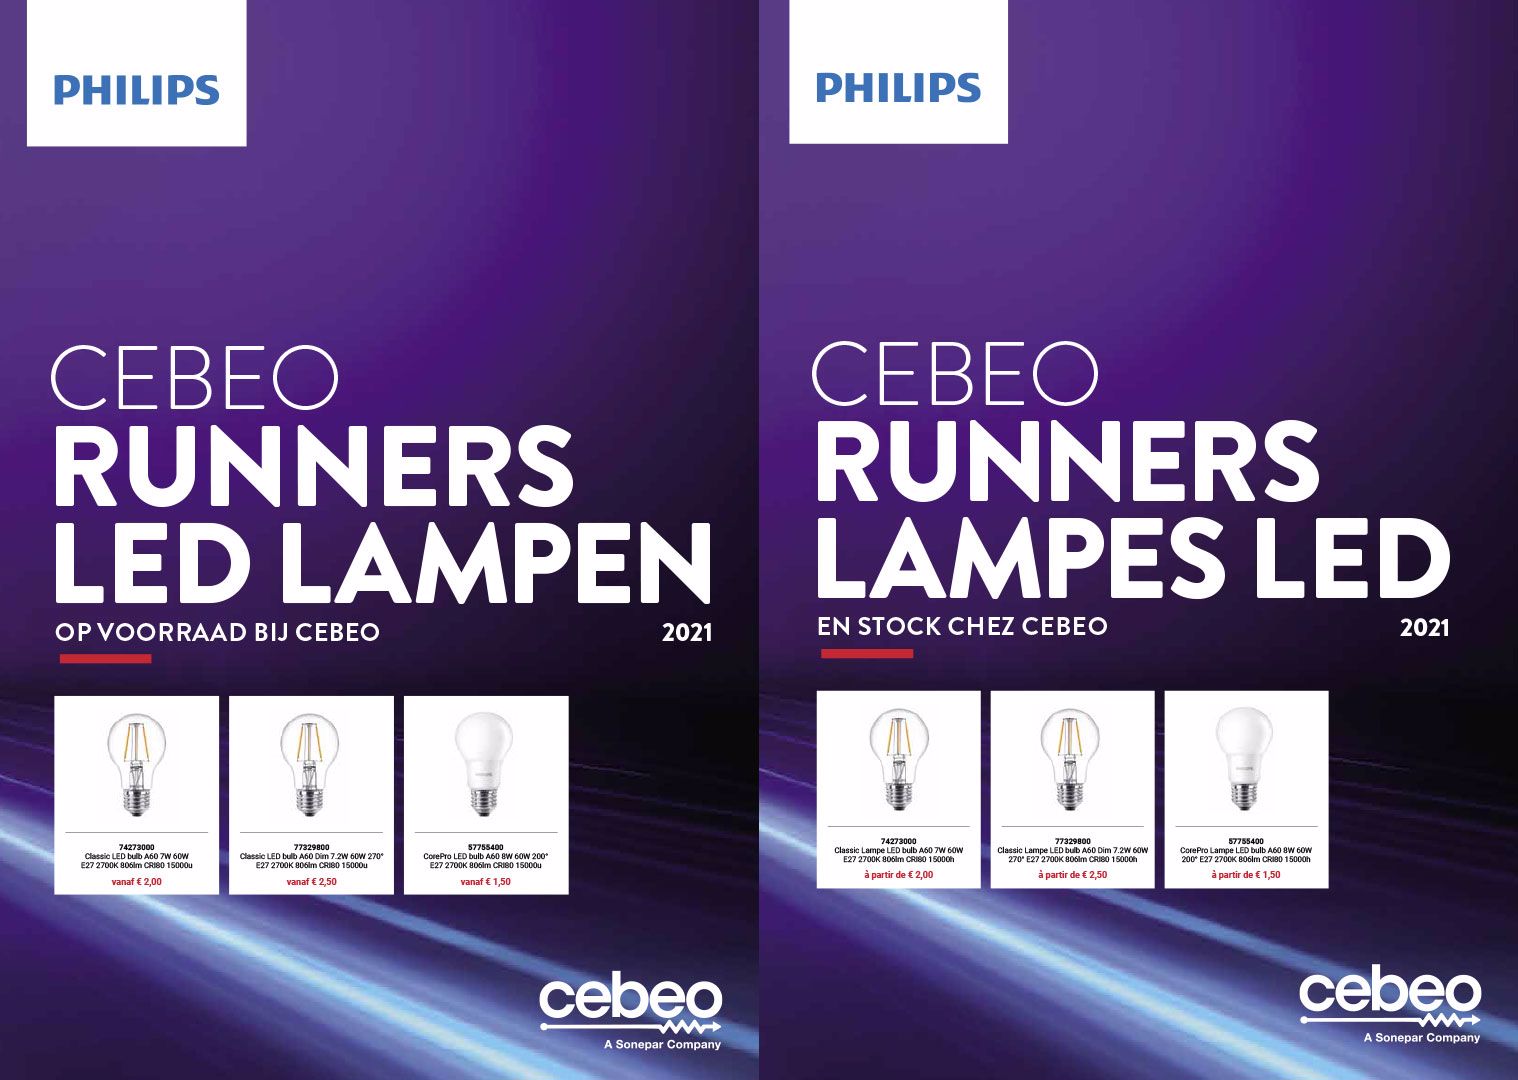 Cebeo runners lampes LED - Philips